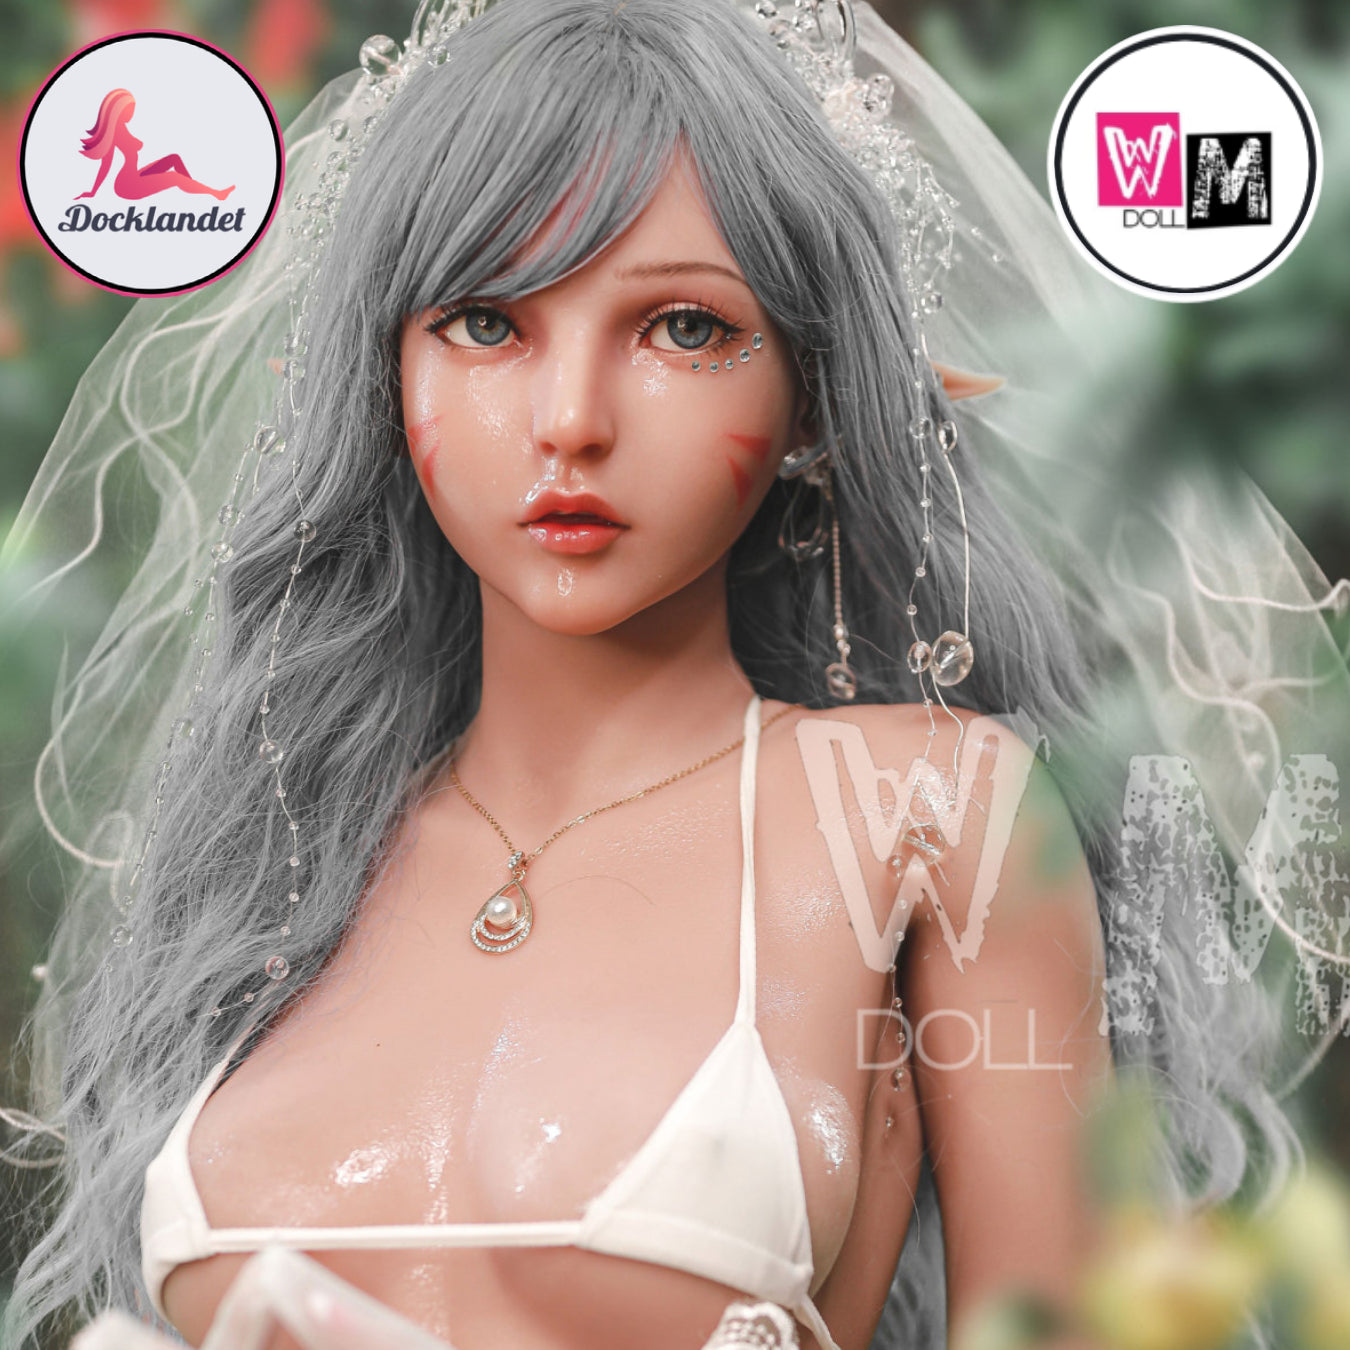 WM-Doll one of the first manufacturers of sex dolls. WM Doll pioneered in the production of quality sex dolls in China and to this day, it remains one of the  leaders in the industry. WM Dolls uses high quality TPE from the US and offers a wide choice of sex dolls: Asian, Caucasian, Black dolls… WM-Doll (also known as WM Doll) is one of the most famous sex doll / real doll brands in the world. When you buy a doll from WM you can be sure of its quality, their sex dolls feature a fully articulate metal steel frame and a realistic woman-like skin. They also offer a large variety of customizable options (movable shoulder, built in or insert vagina, enhanced mouth, standing foot etc …). They also provide the heating feature (torso temperature can be warmed up to 37 Celsius,or 98.6 Fahrenheit, the temperature of a real body). Their sex dolls can even moan during intercourse.